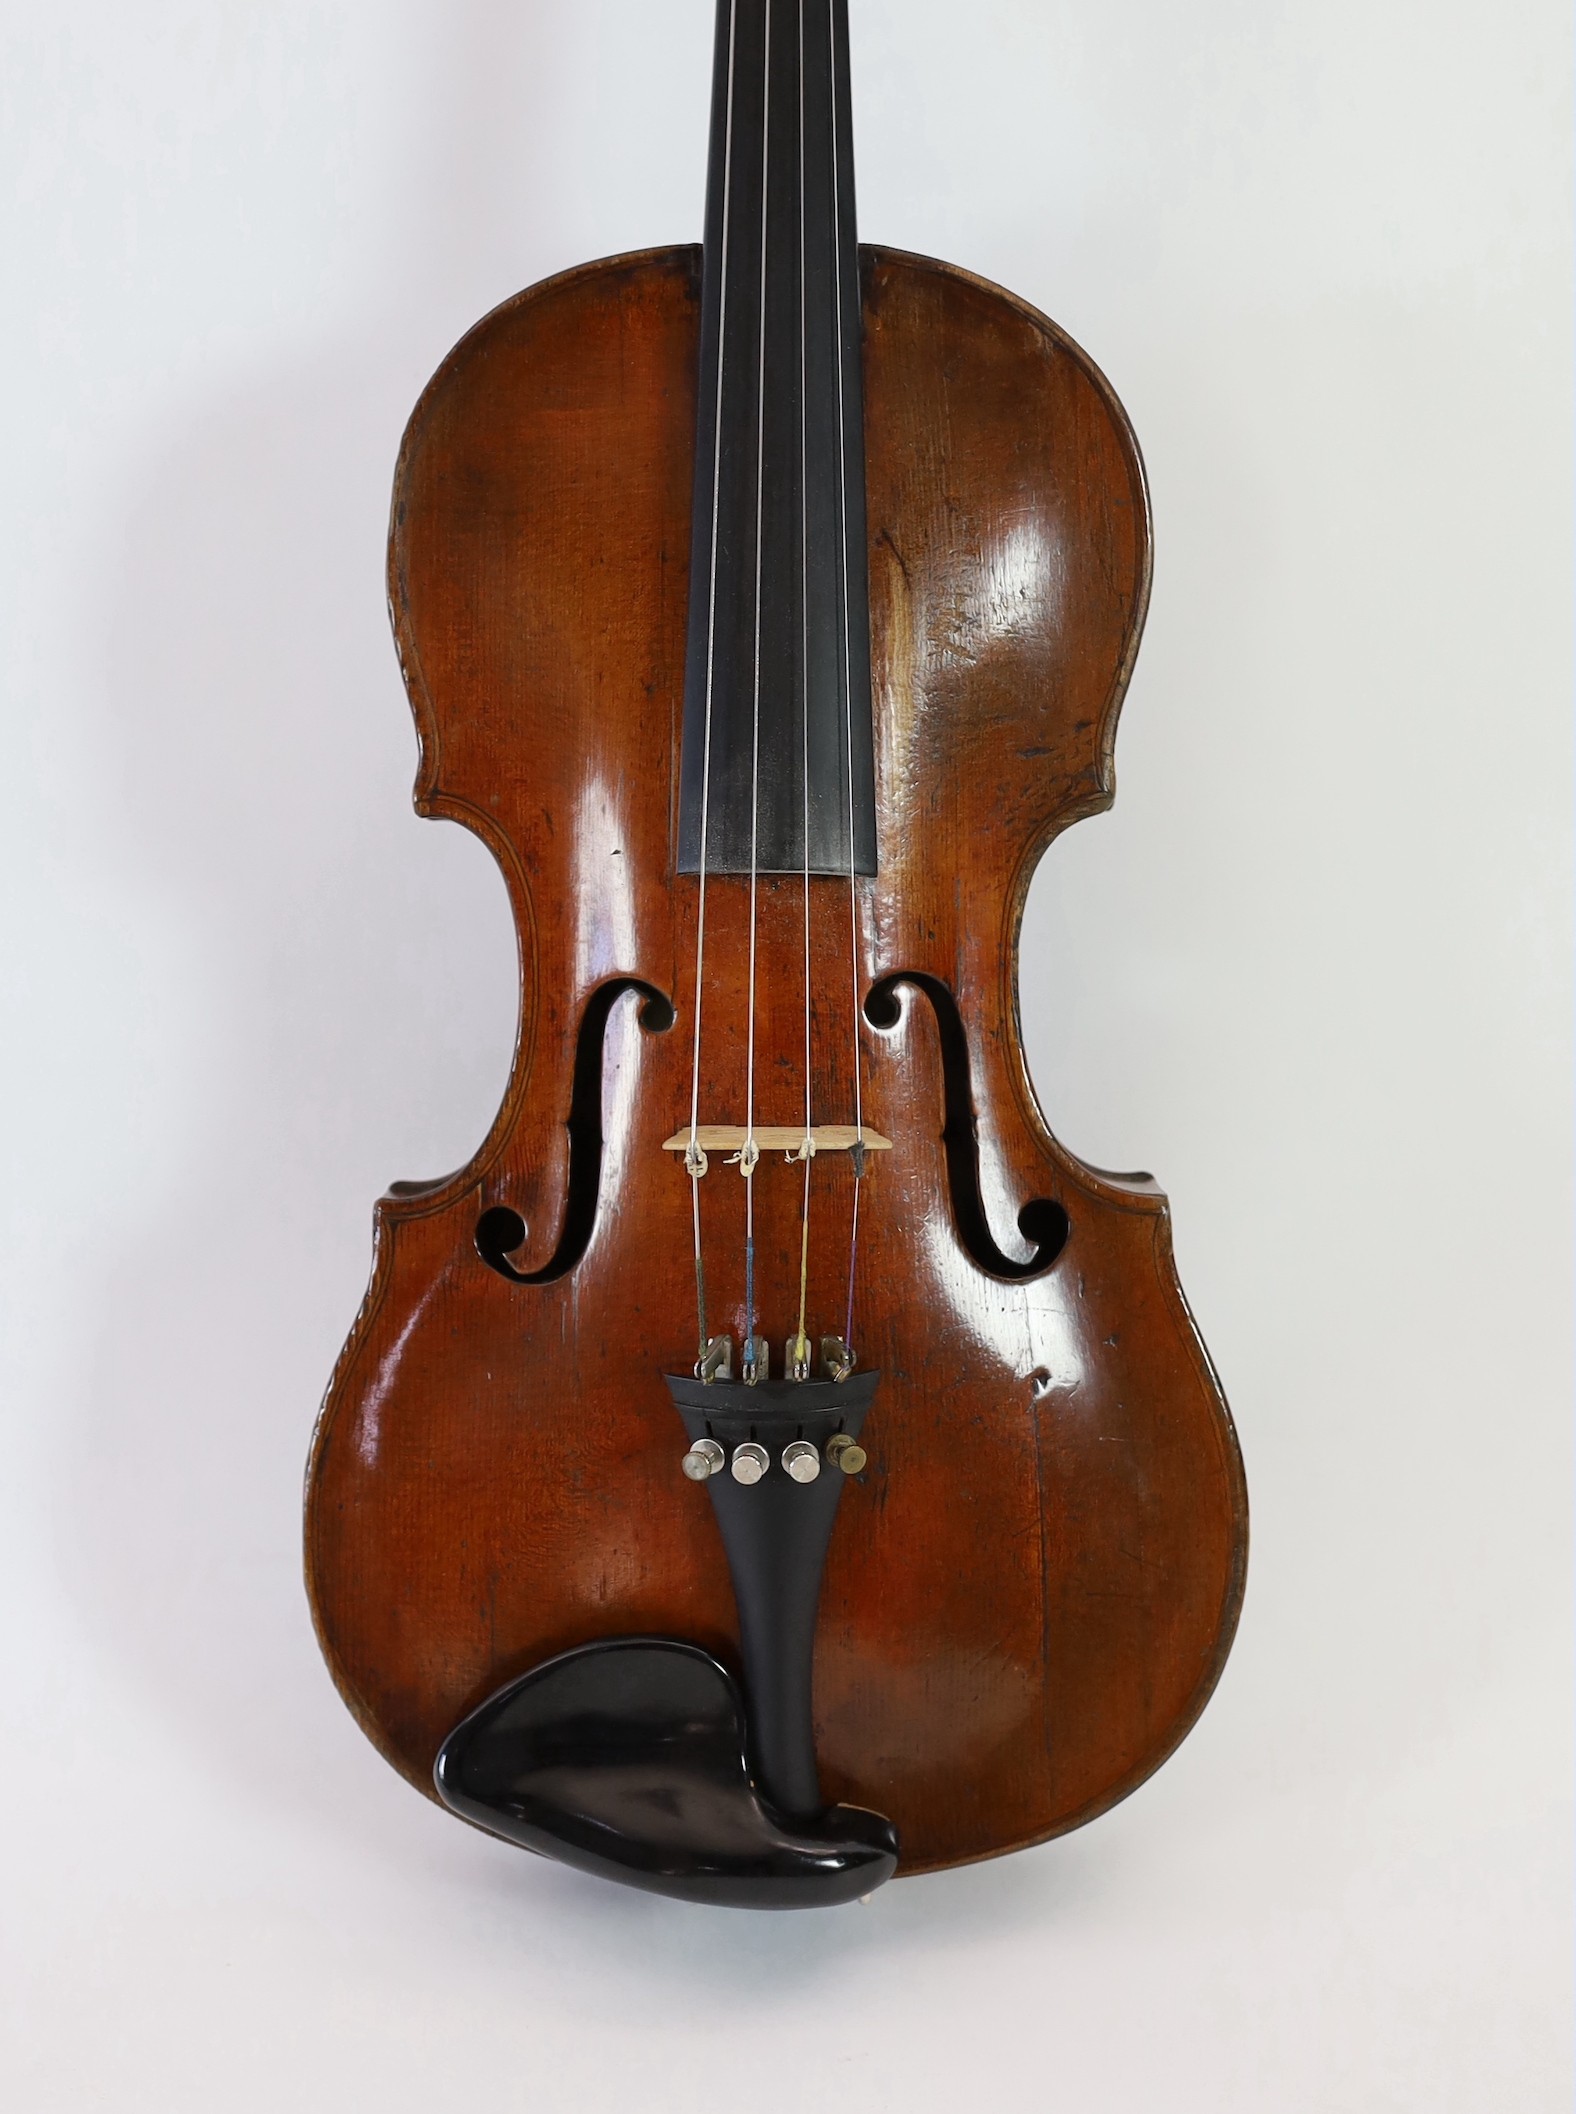 A 19th century violin attributed to Klotz school, unlabelled, the back and sides with medium curl, - Image 6 of 10